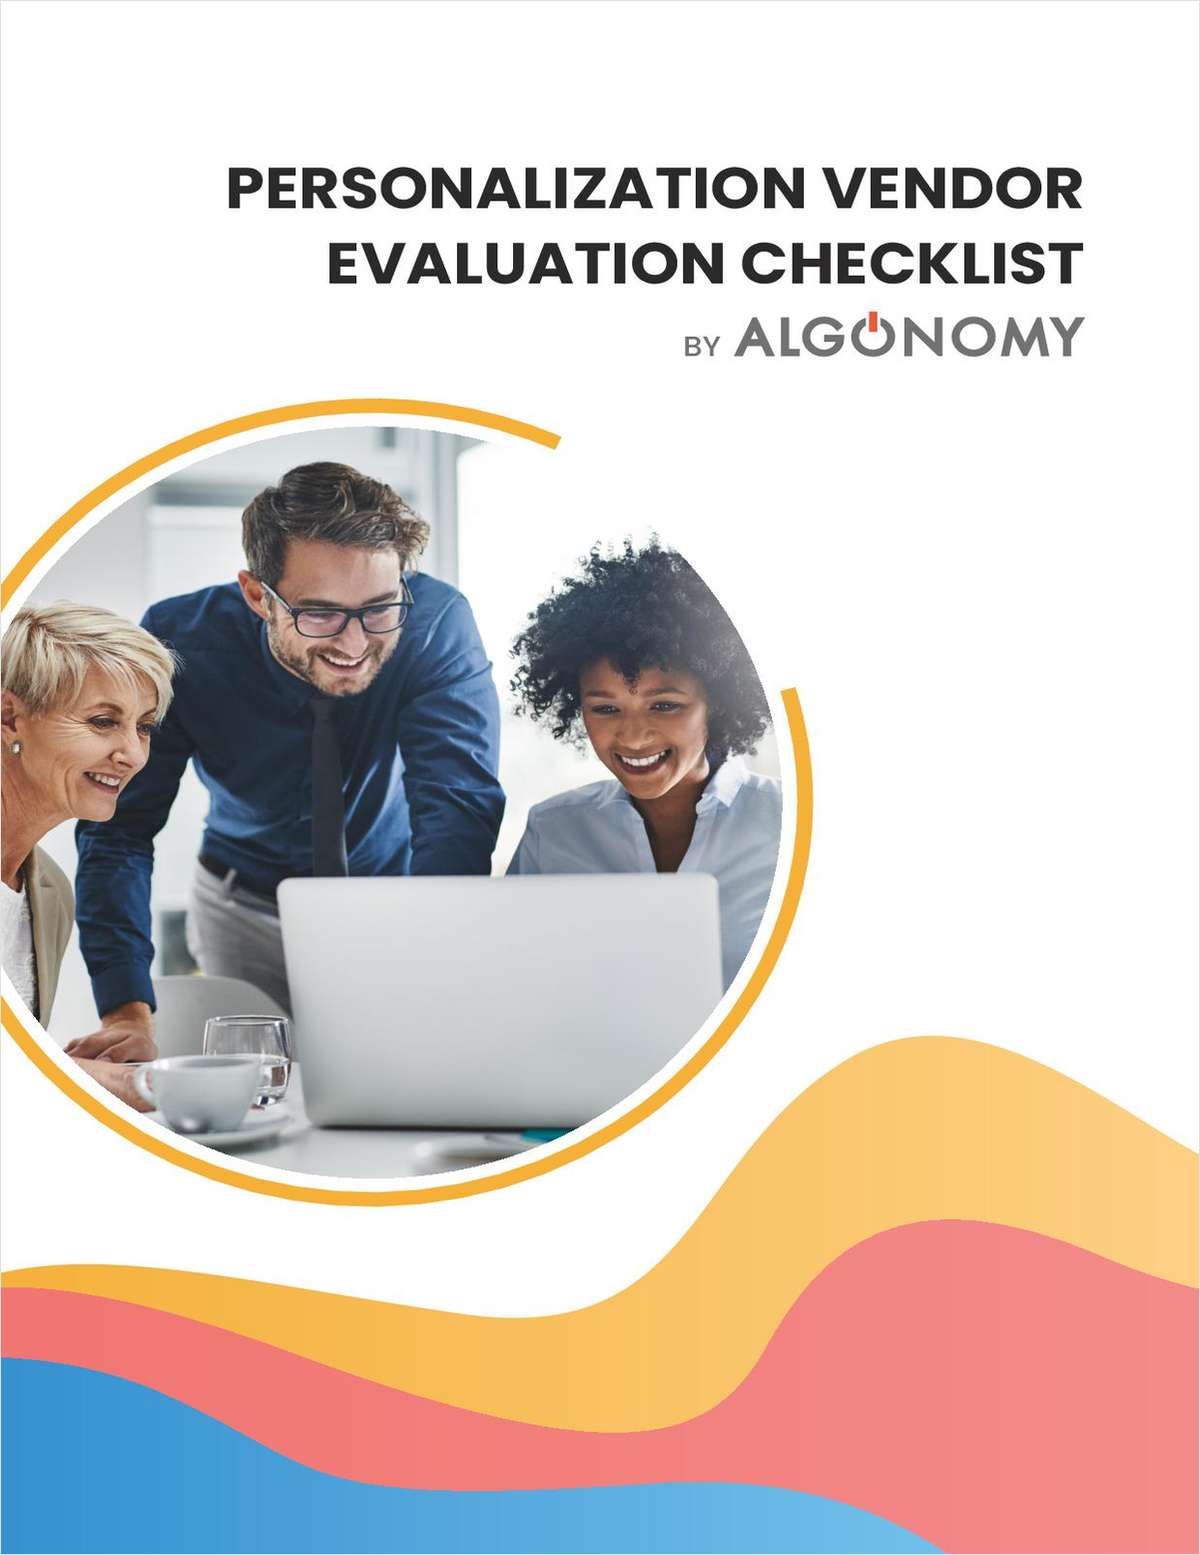 Does you know if your Search Provider Offer Personalization Across Search Results, Navigation and Content? Use This Checklist!